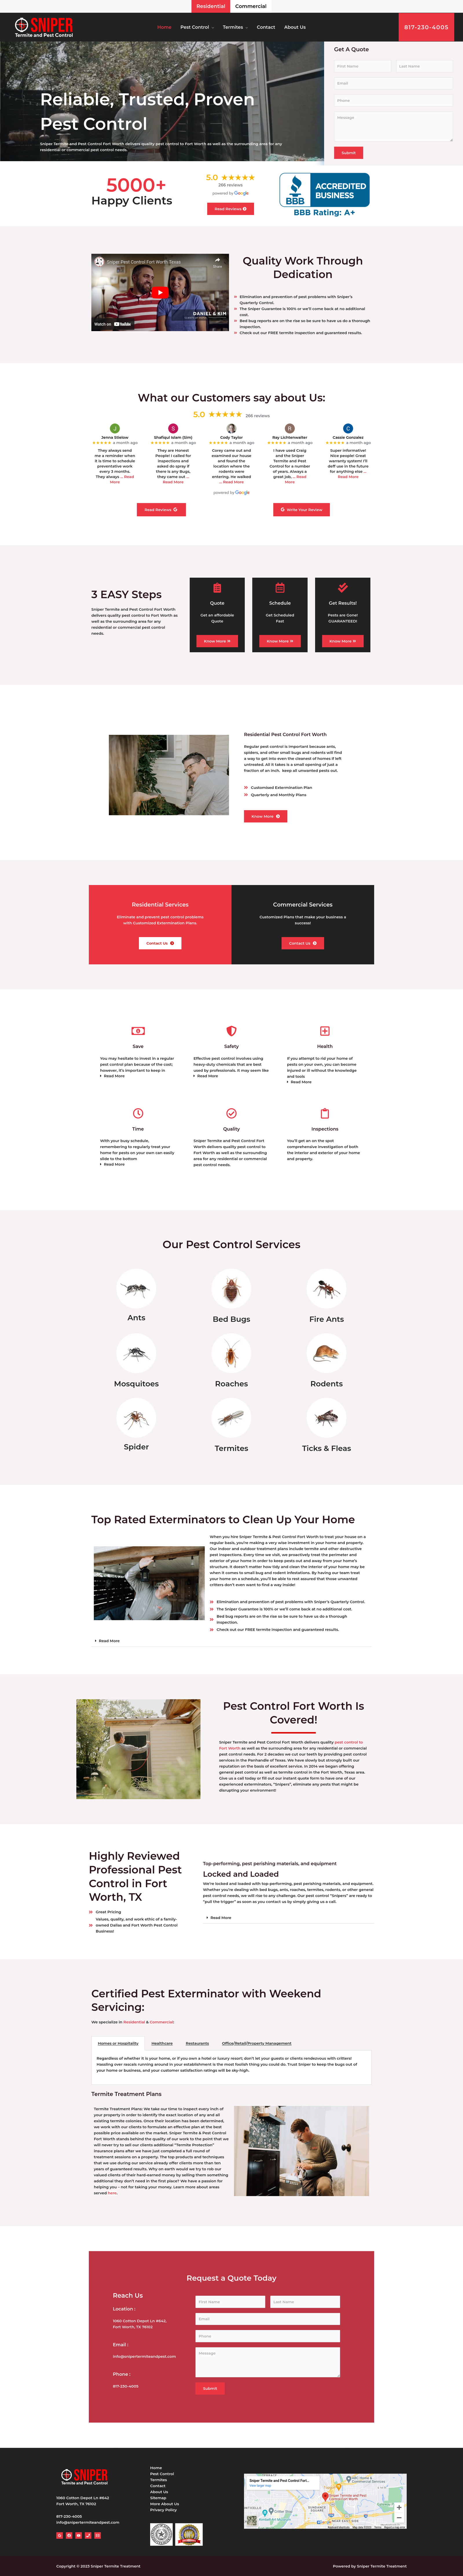 Sniper Pest Control Service Digital Preview - Sniper is one of the most highly rated Pest Control and Termite Treatment services in the Fort Worth area. We were able to design a brand new website for them while improving performance and ensuring the optimum SEO configuration.